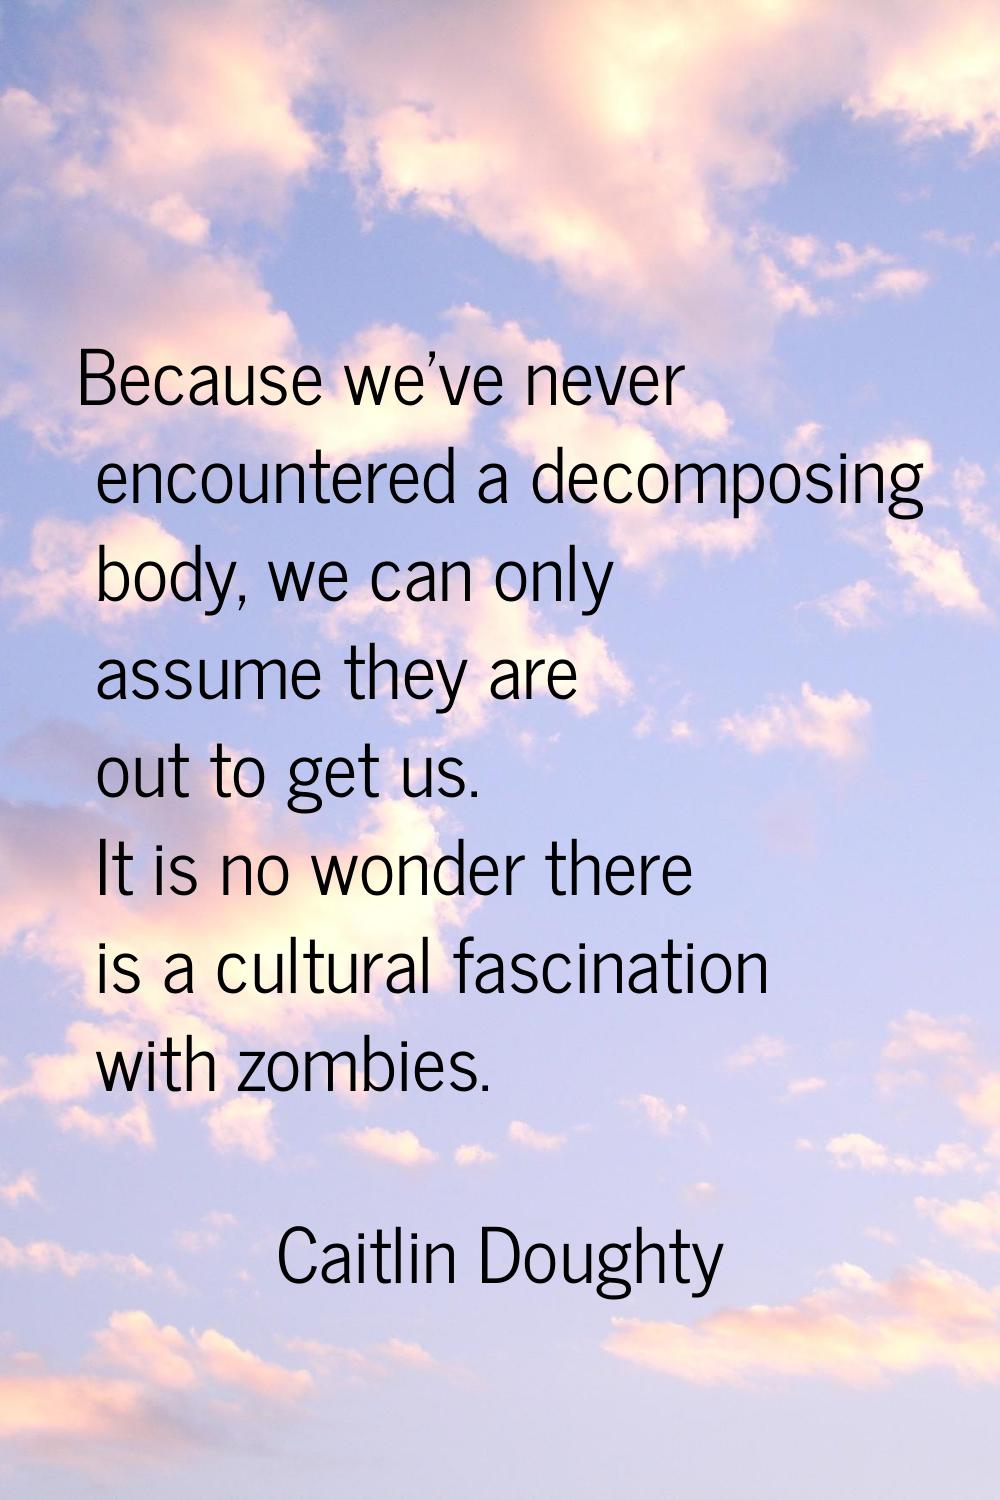 Because we've never encountered a decomposing body, we can only assume they are out to get us. It i